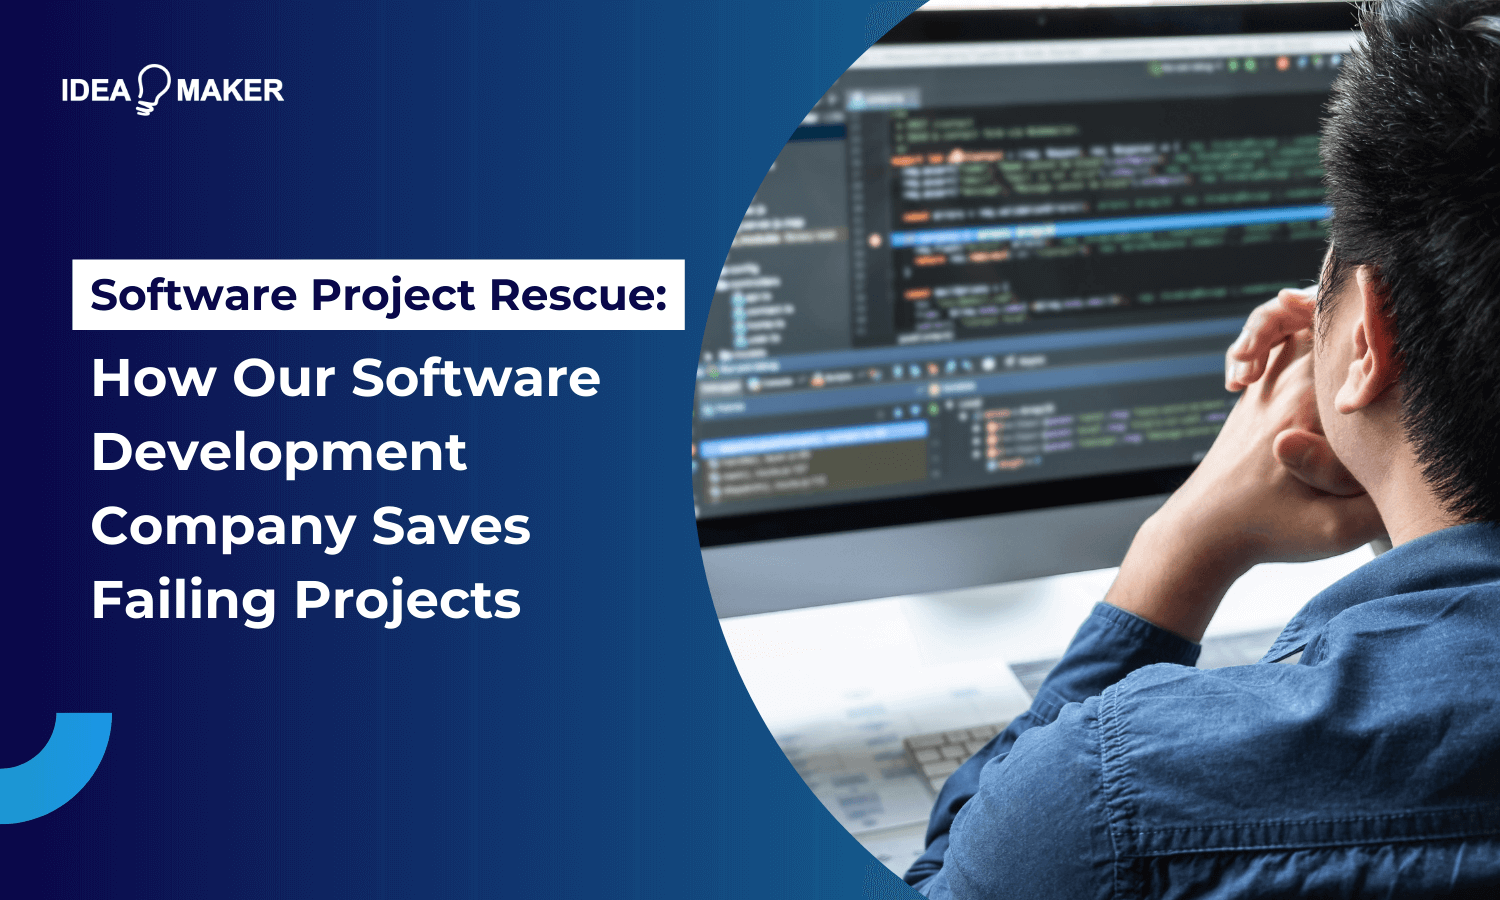 Software Project Rescue How Our Software Development Company Saves Failing Projects